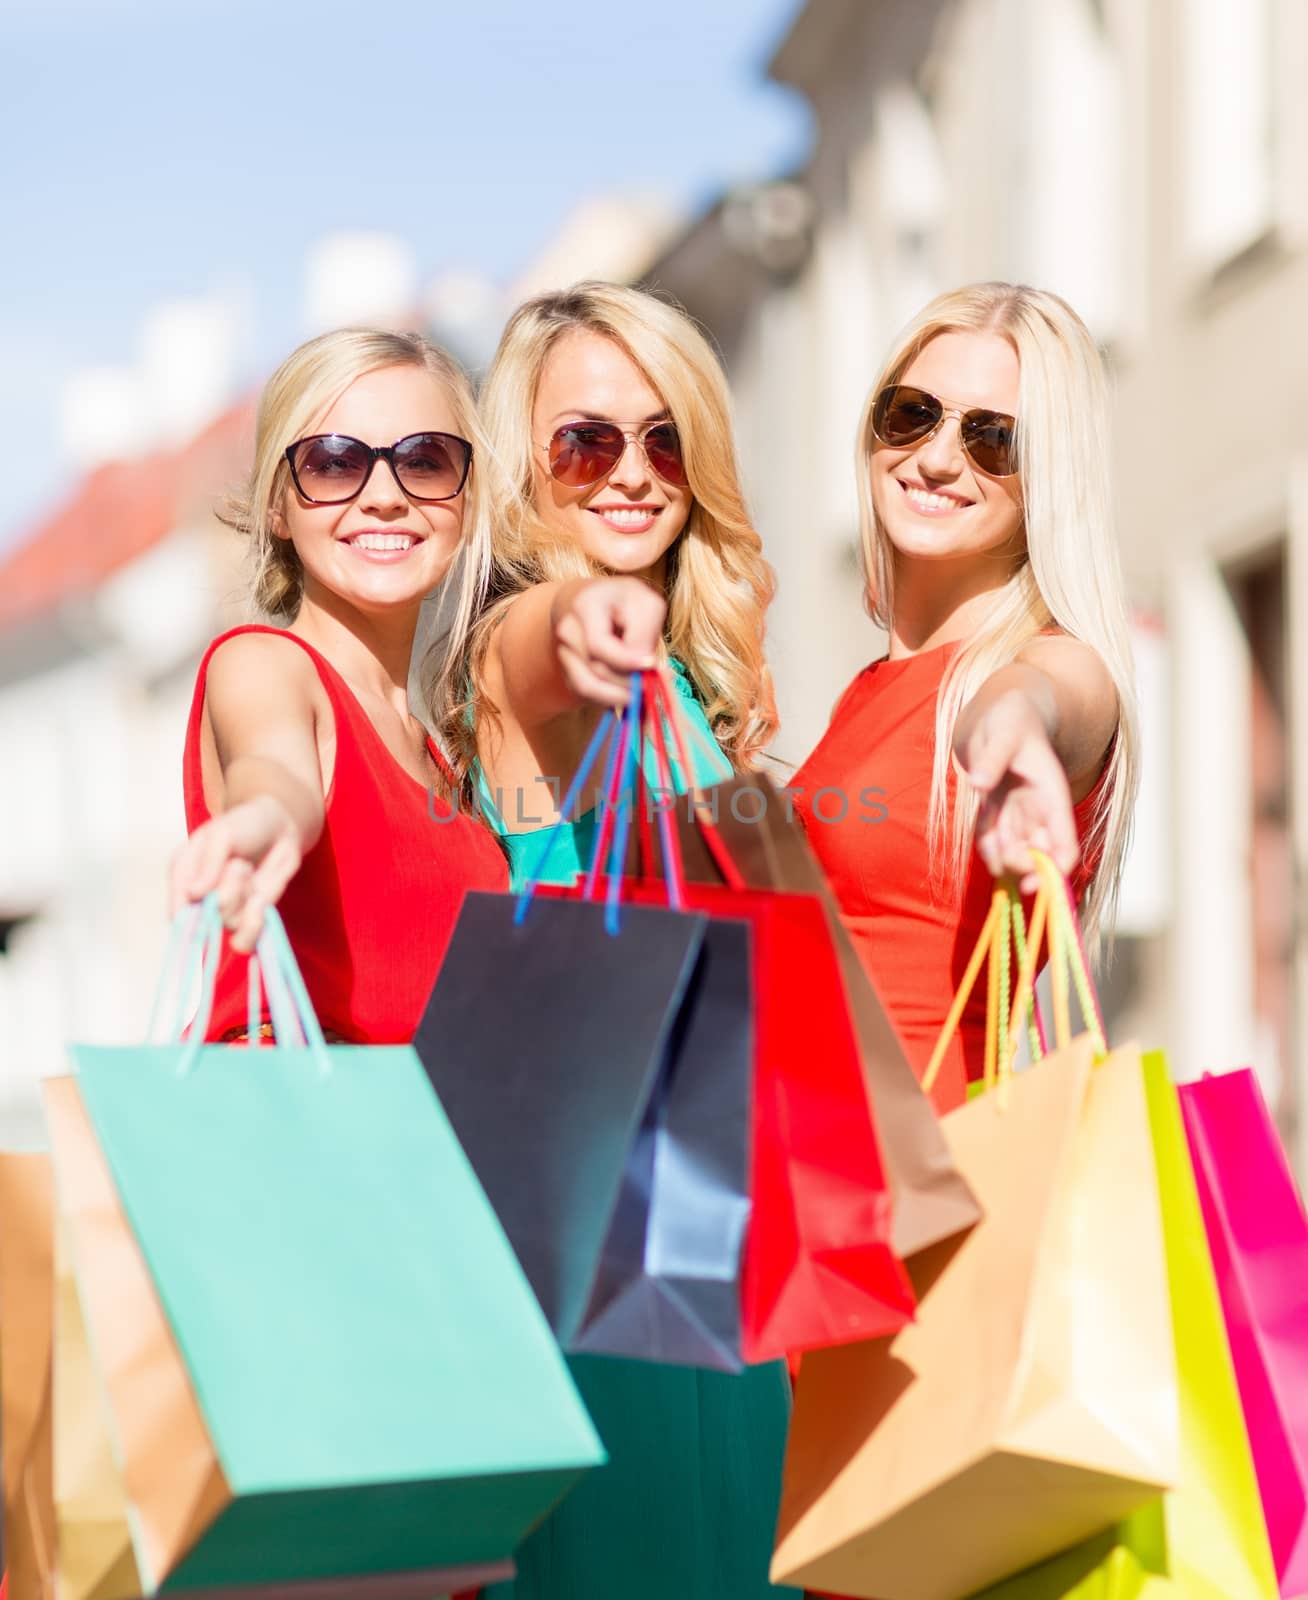 beautiful women with shopping bags in the ctiy by dolgachov